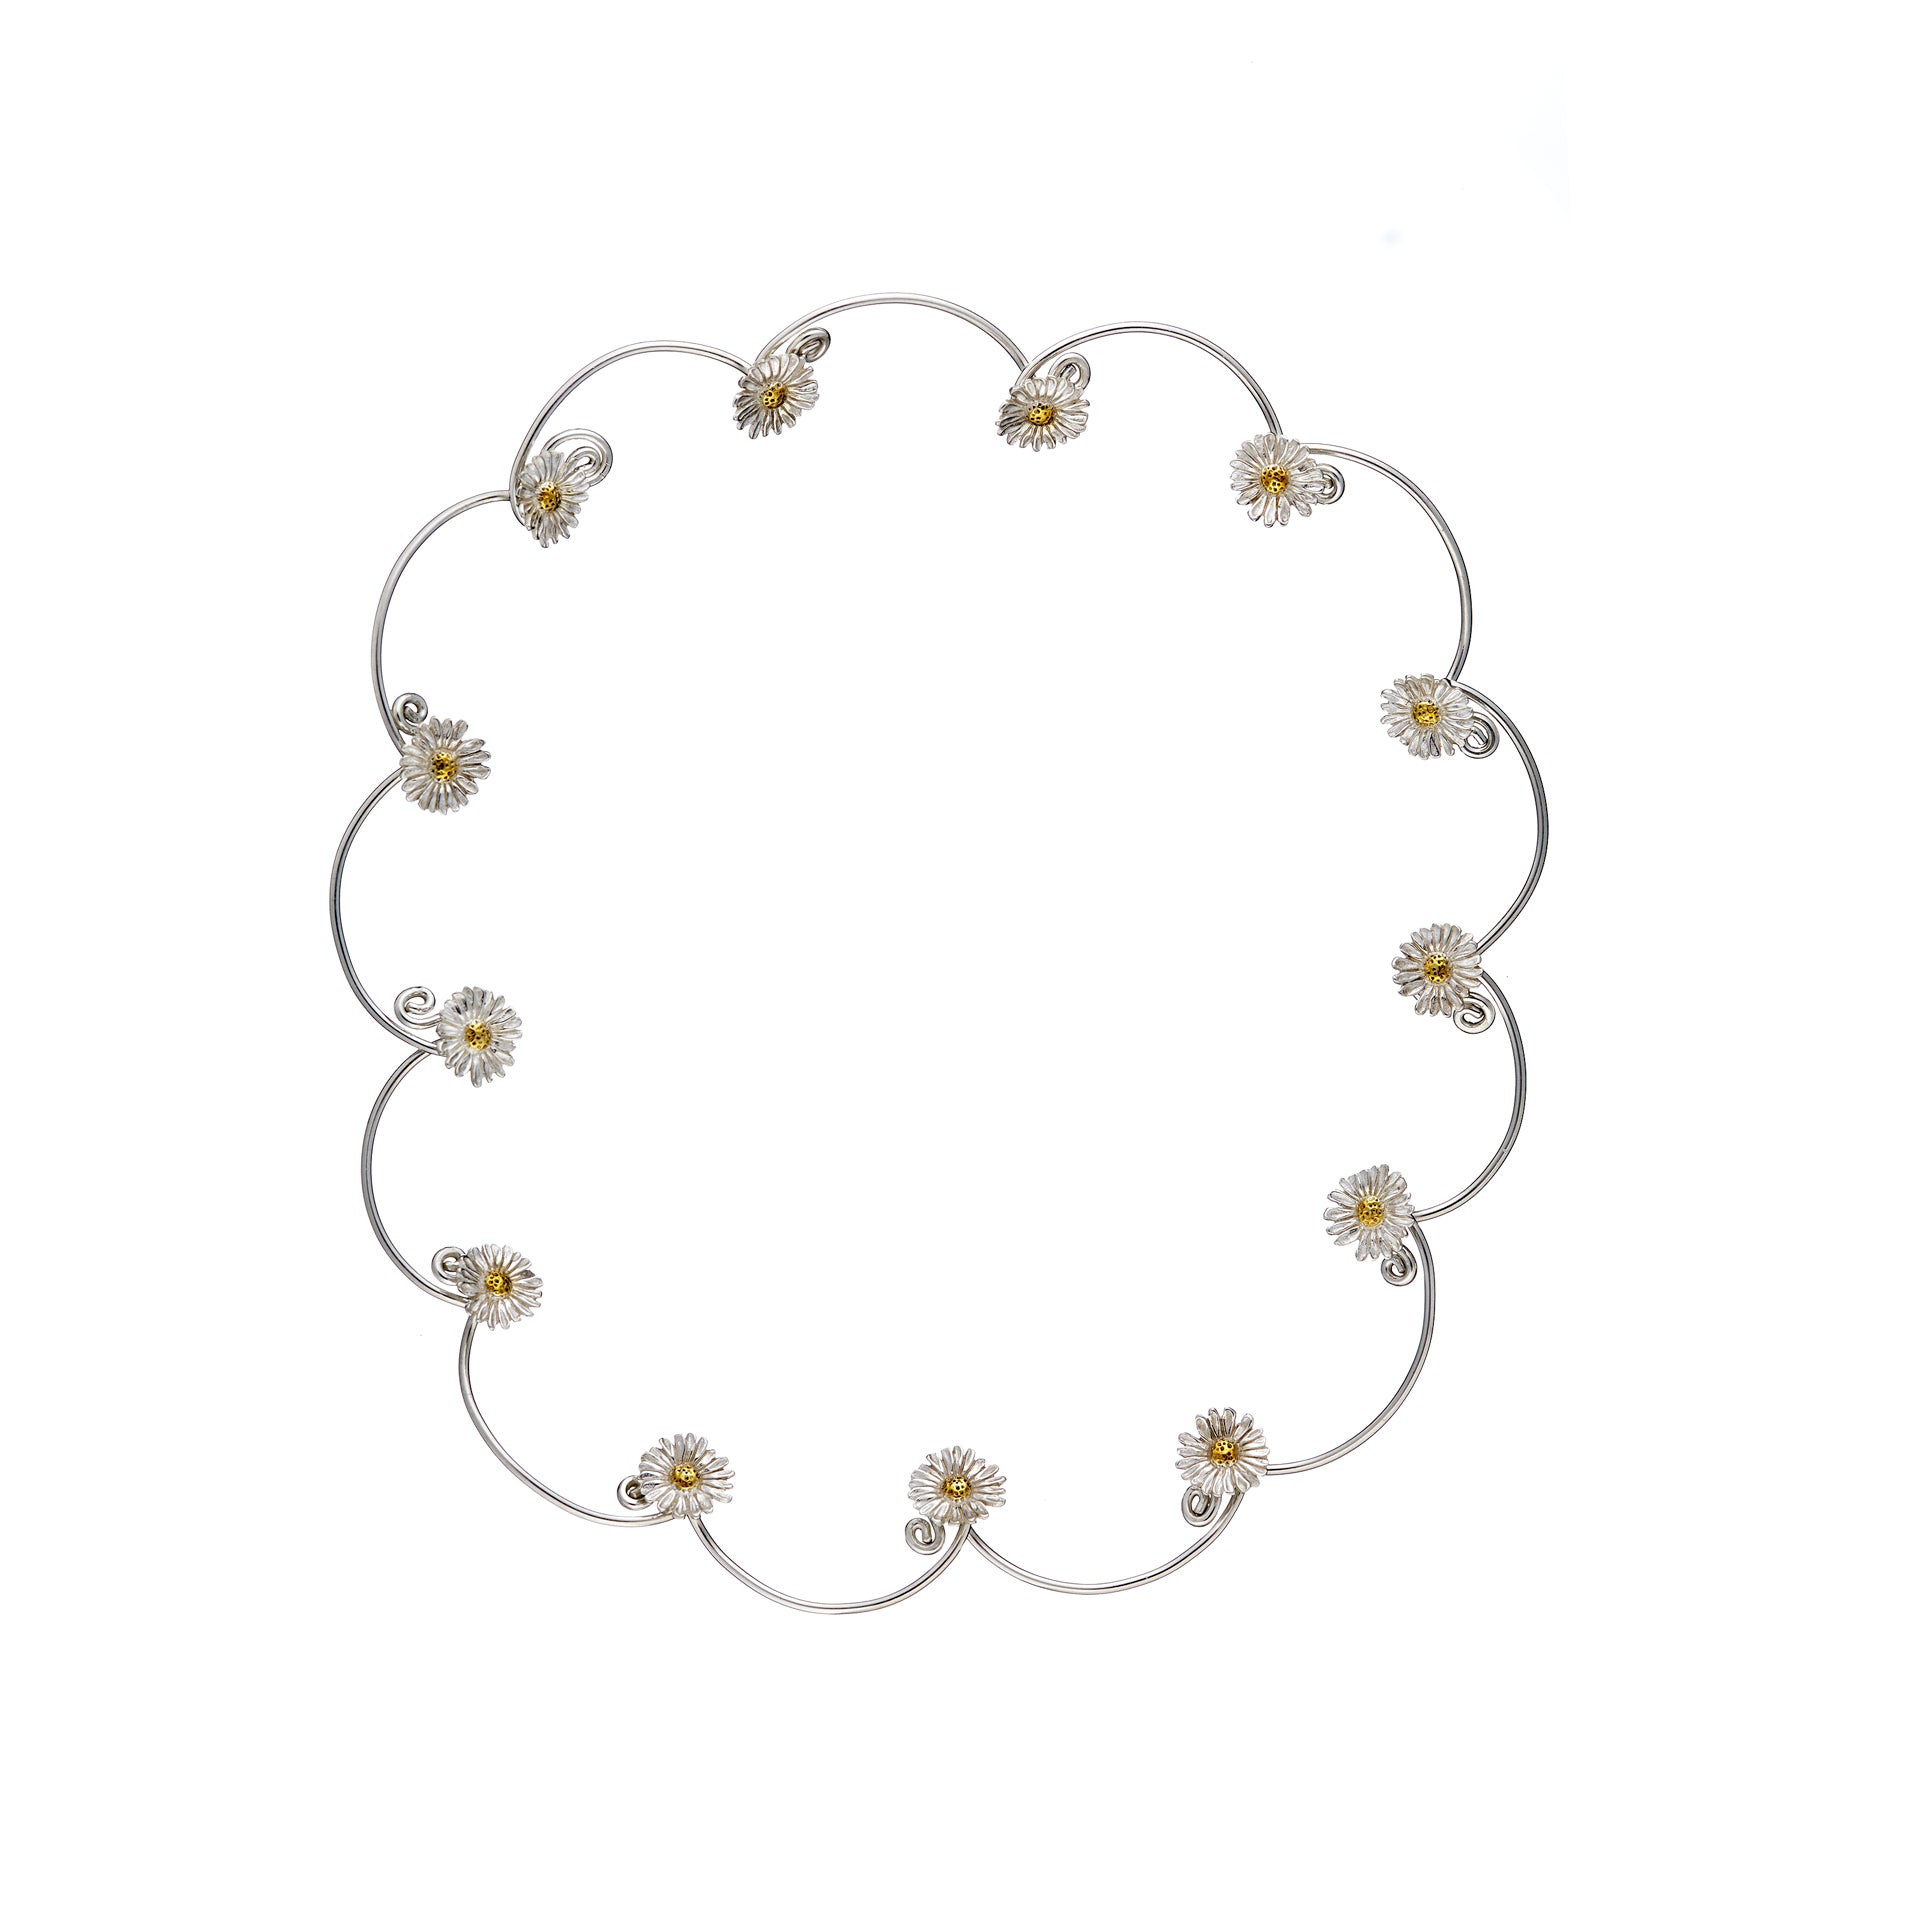 Sterling silver Daisy Chain Necklet that can be taken apart and put back together again. Handmade in Ireland by Elena Brennan.